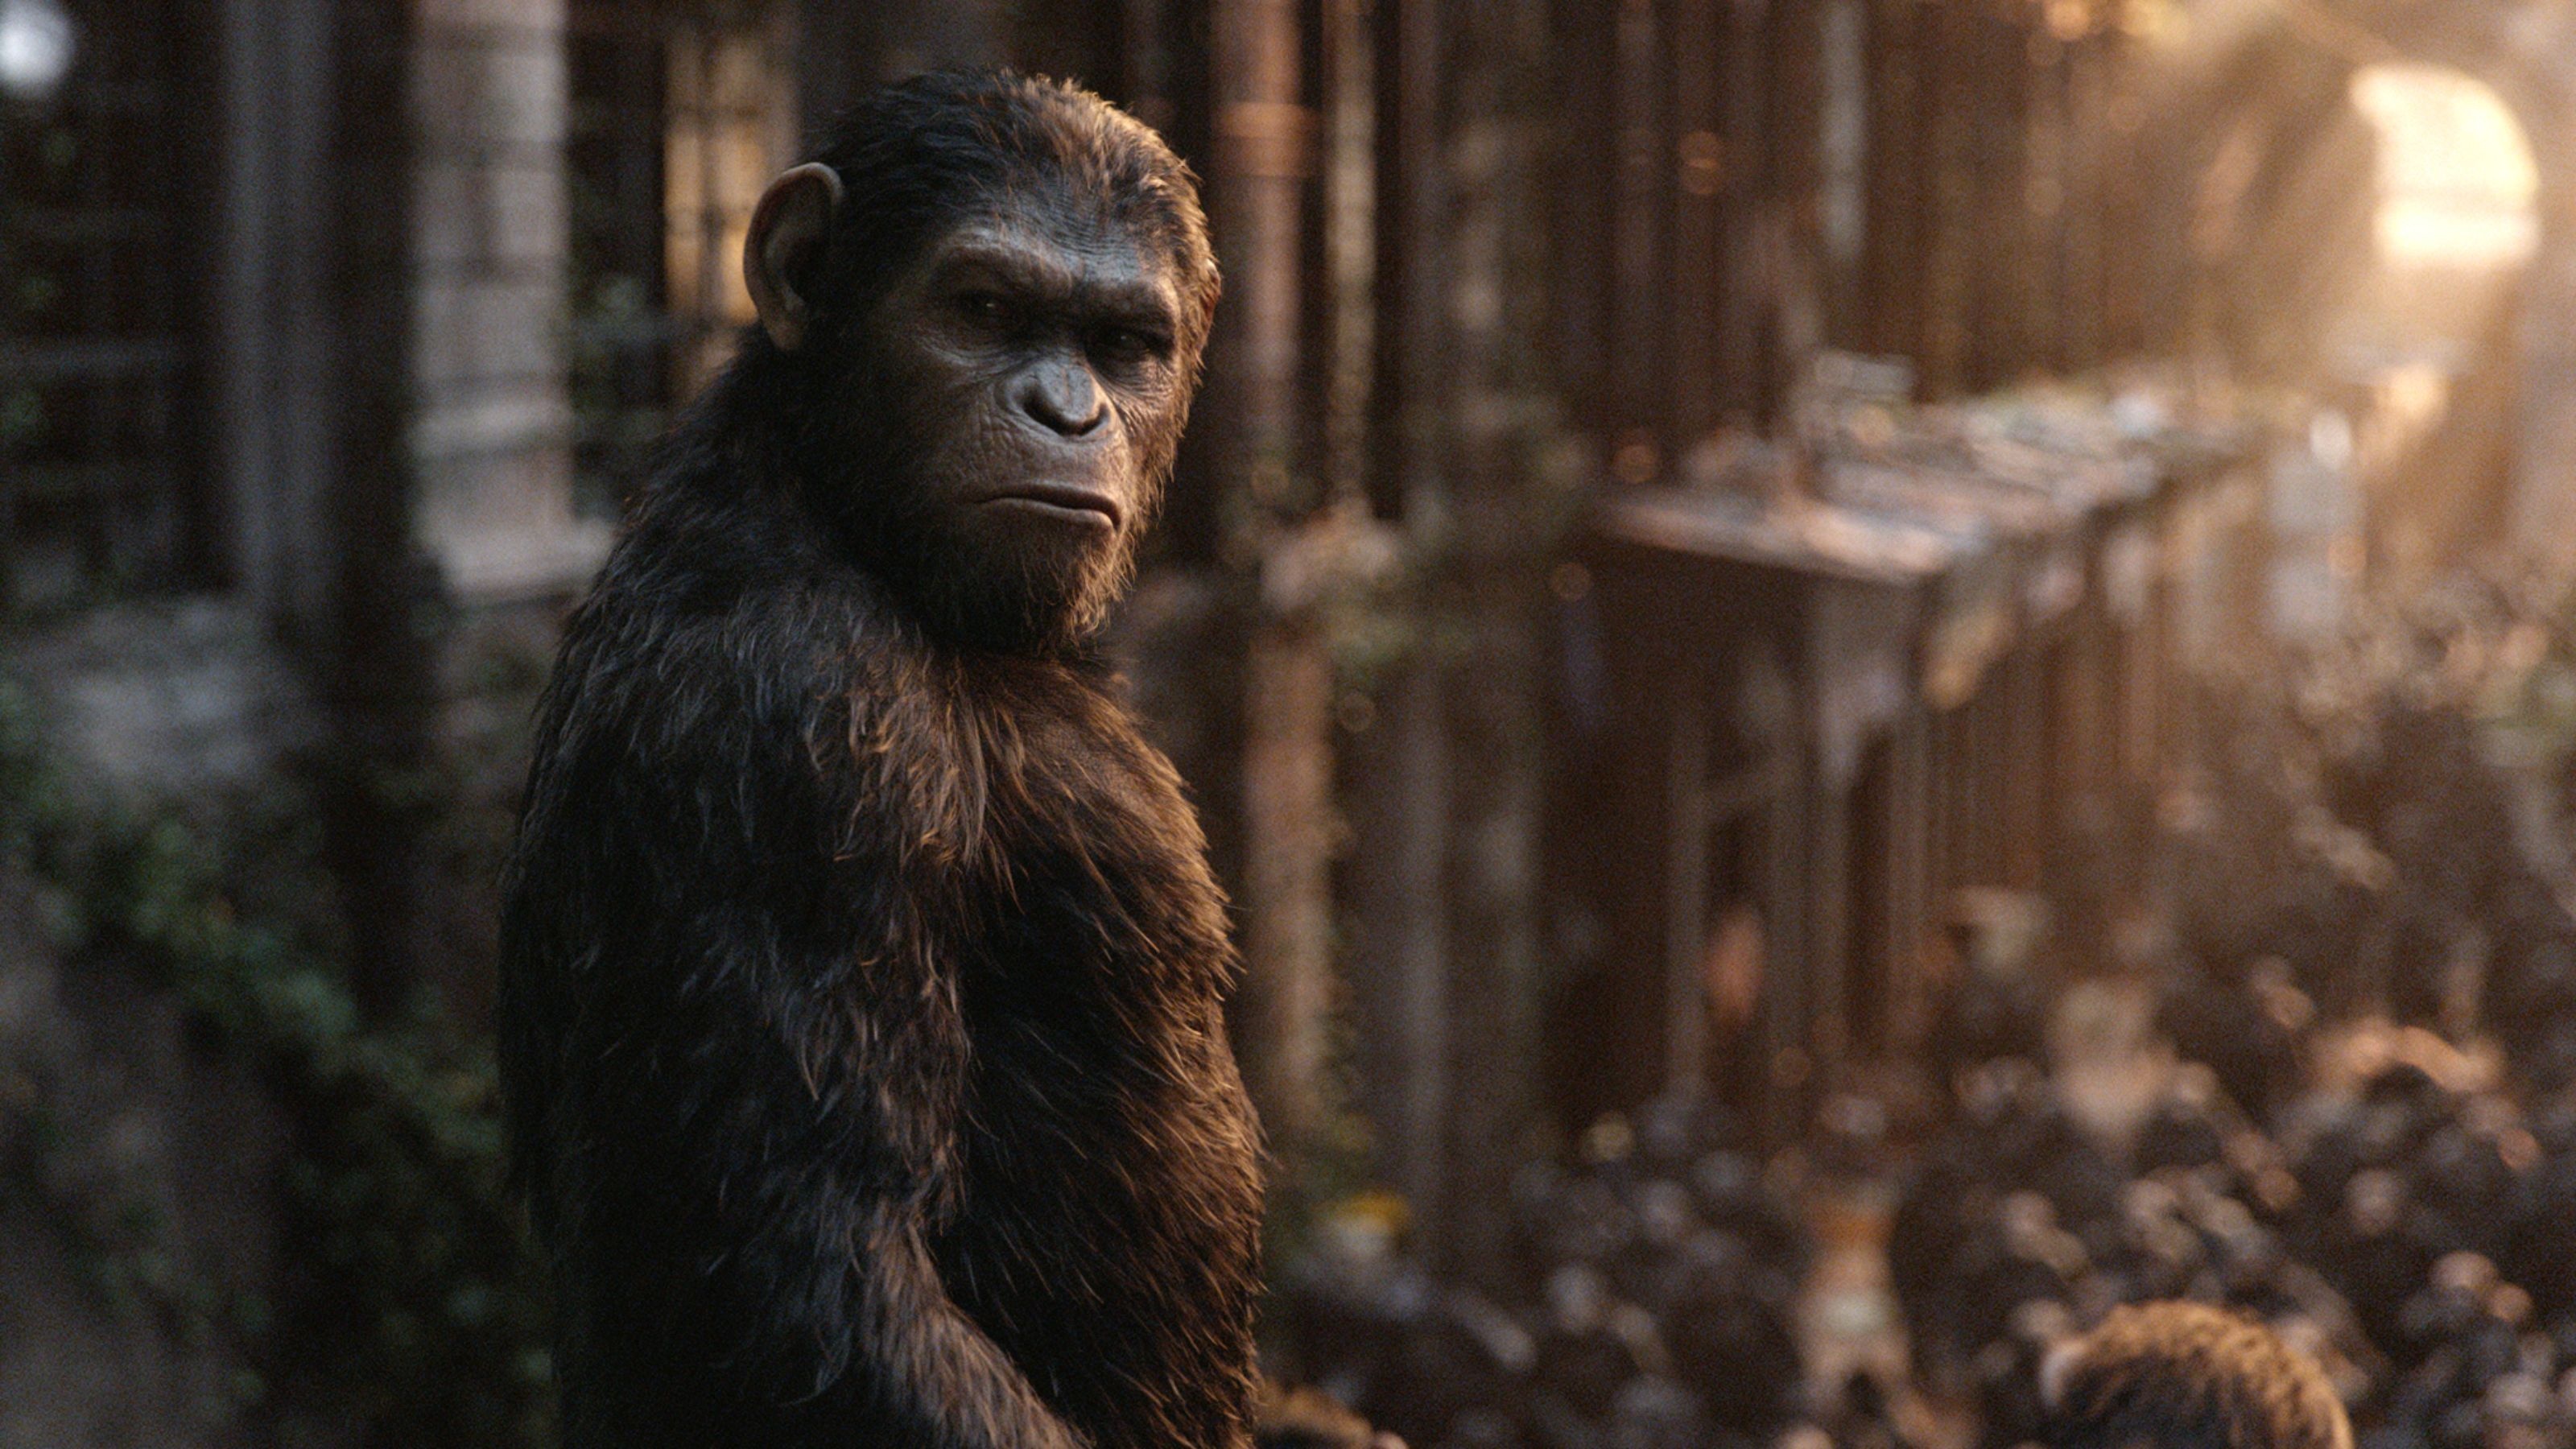 Planet of the Apes, War film, Top free wallpapers, Backgrounds, 3200x1800 HD Desktop